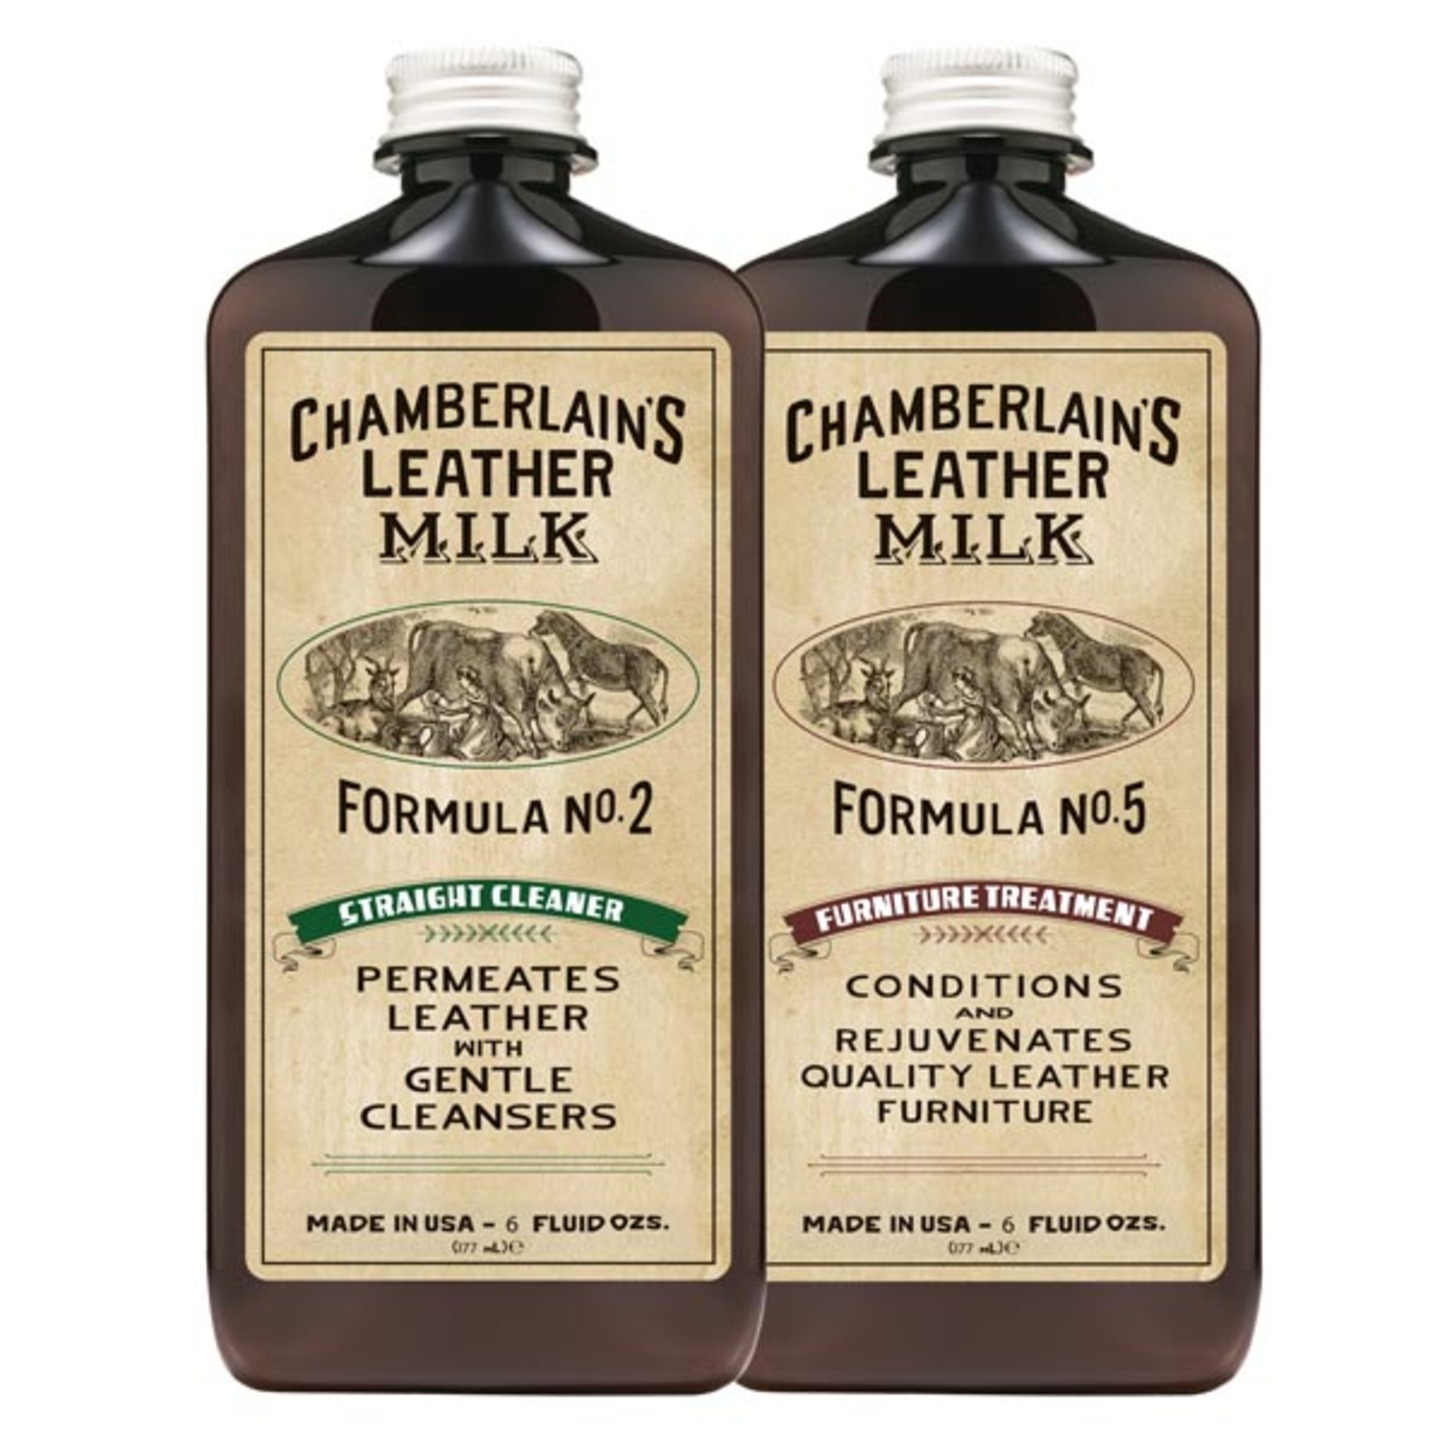 CHAMBERLAINS LEATHER MILK CLEAN & CONDITION FURNITURE LEATHER CARE SET NO. 2 & NO. 5 - 6 oz